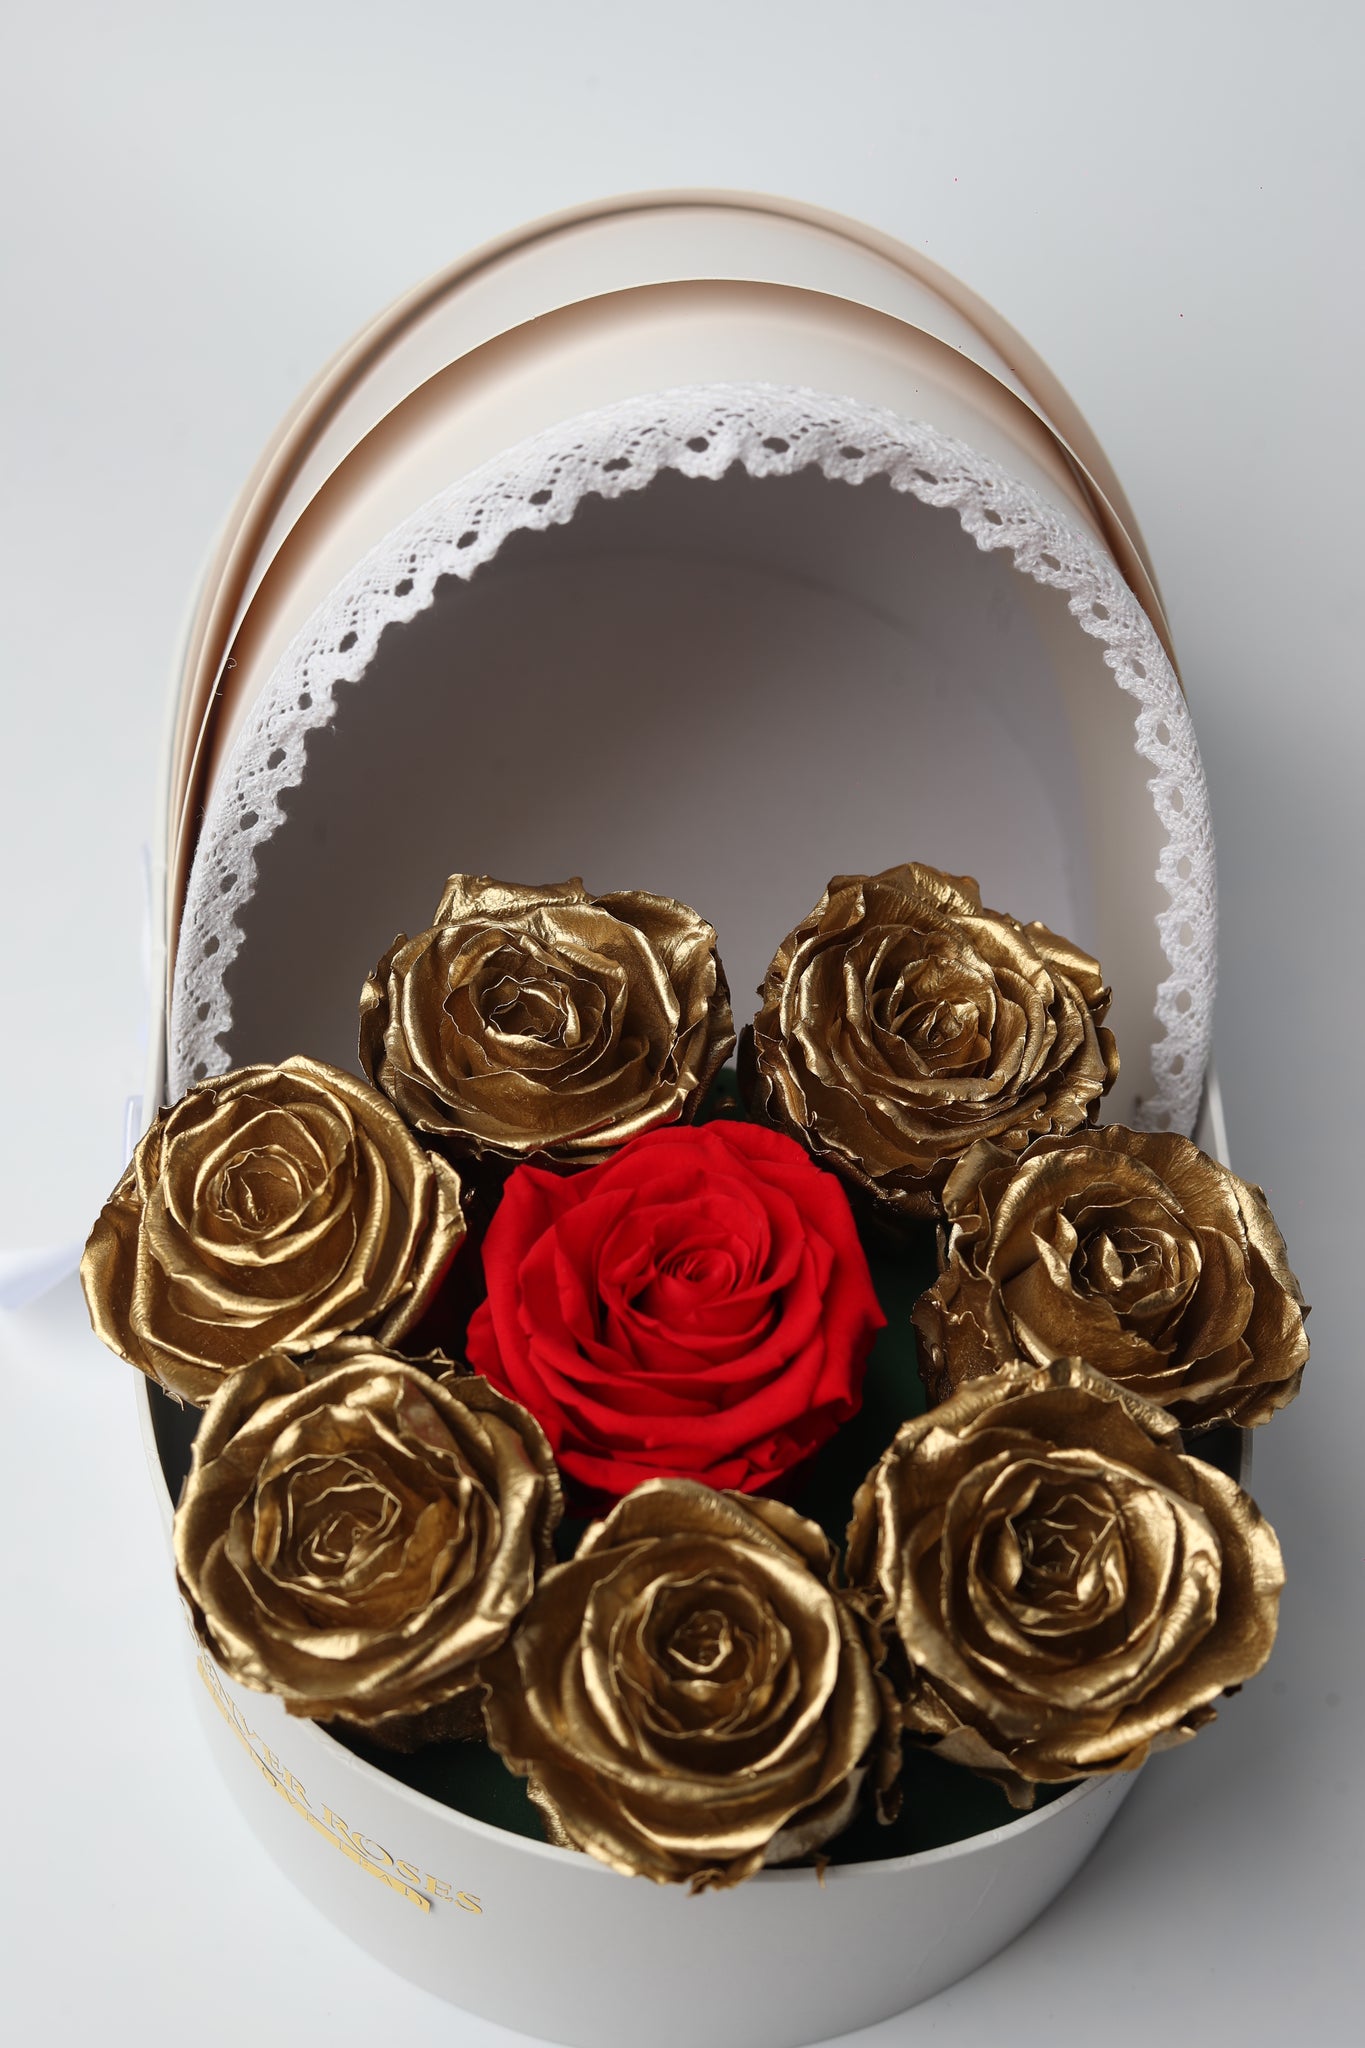 Bundle of Joy/ Gold and Red Roses